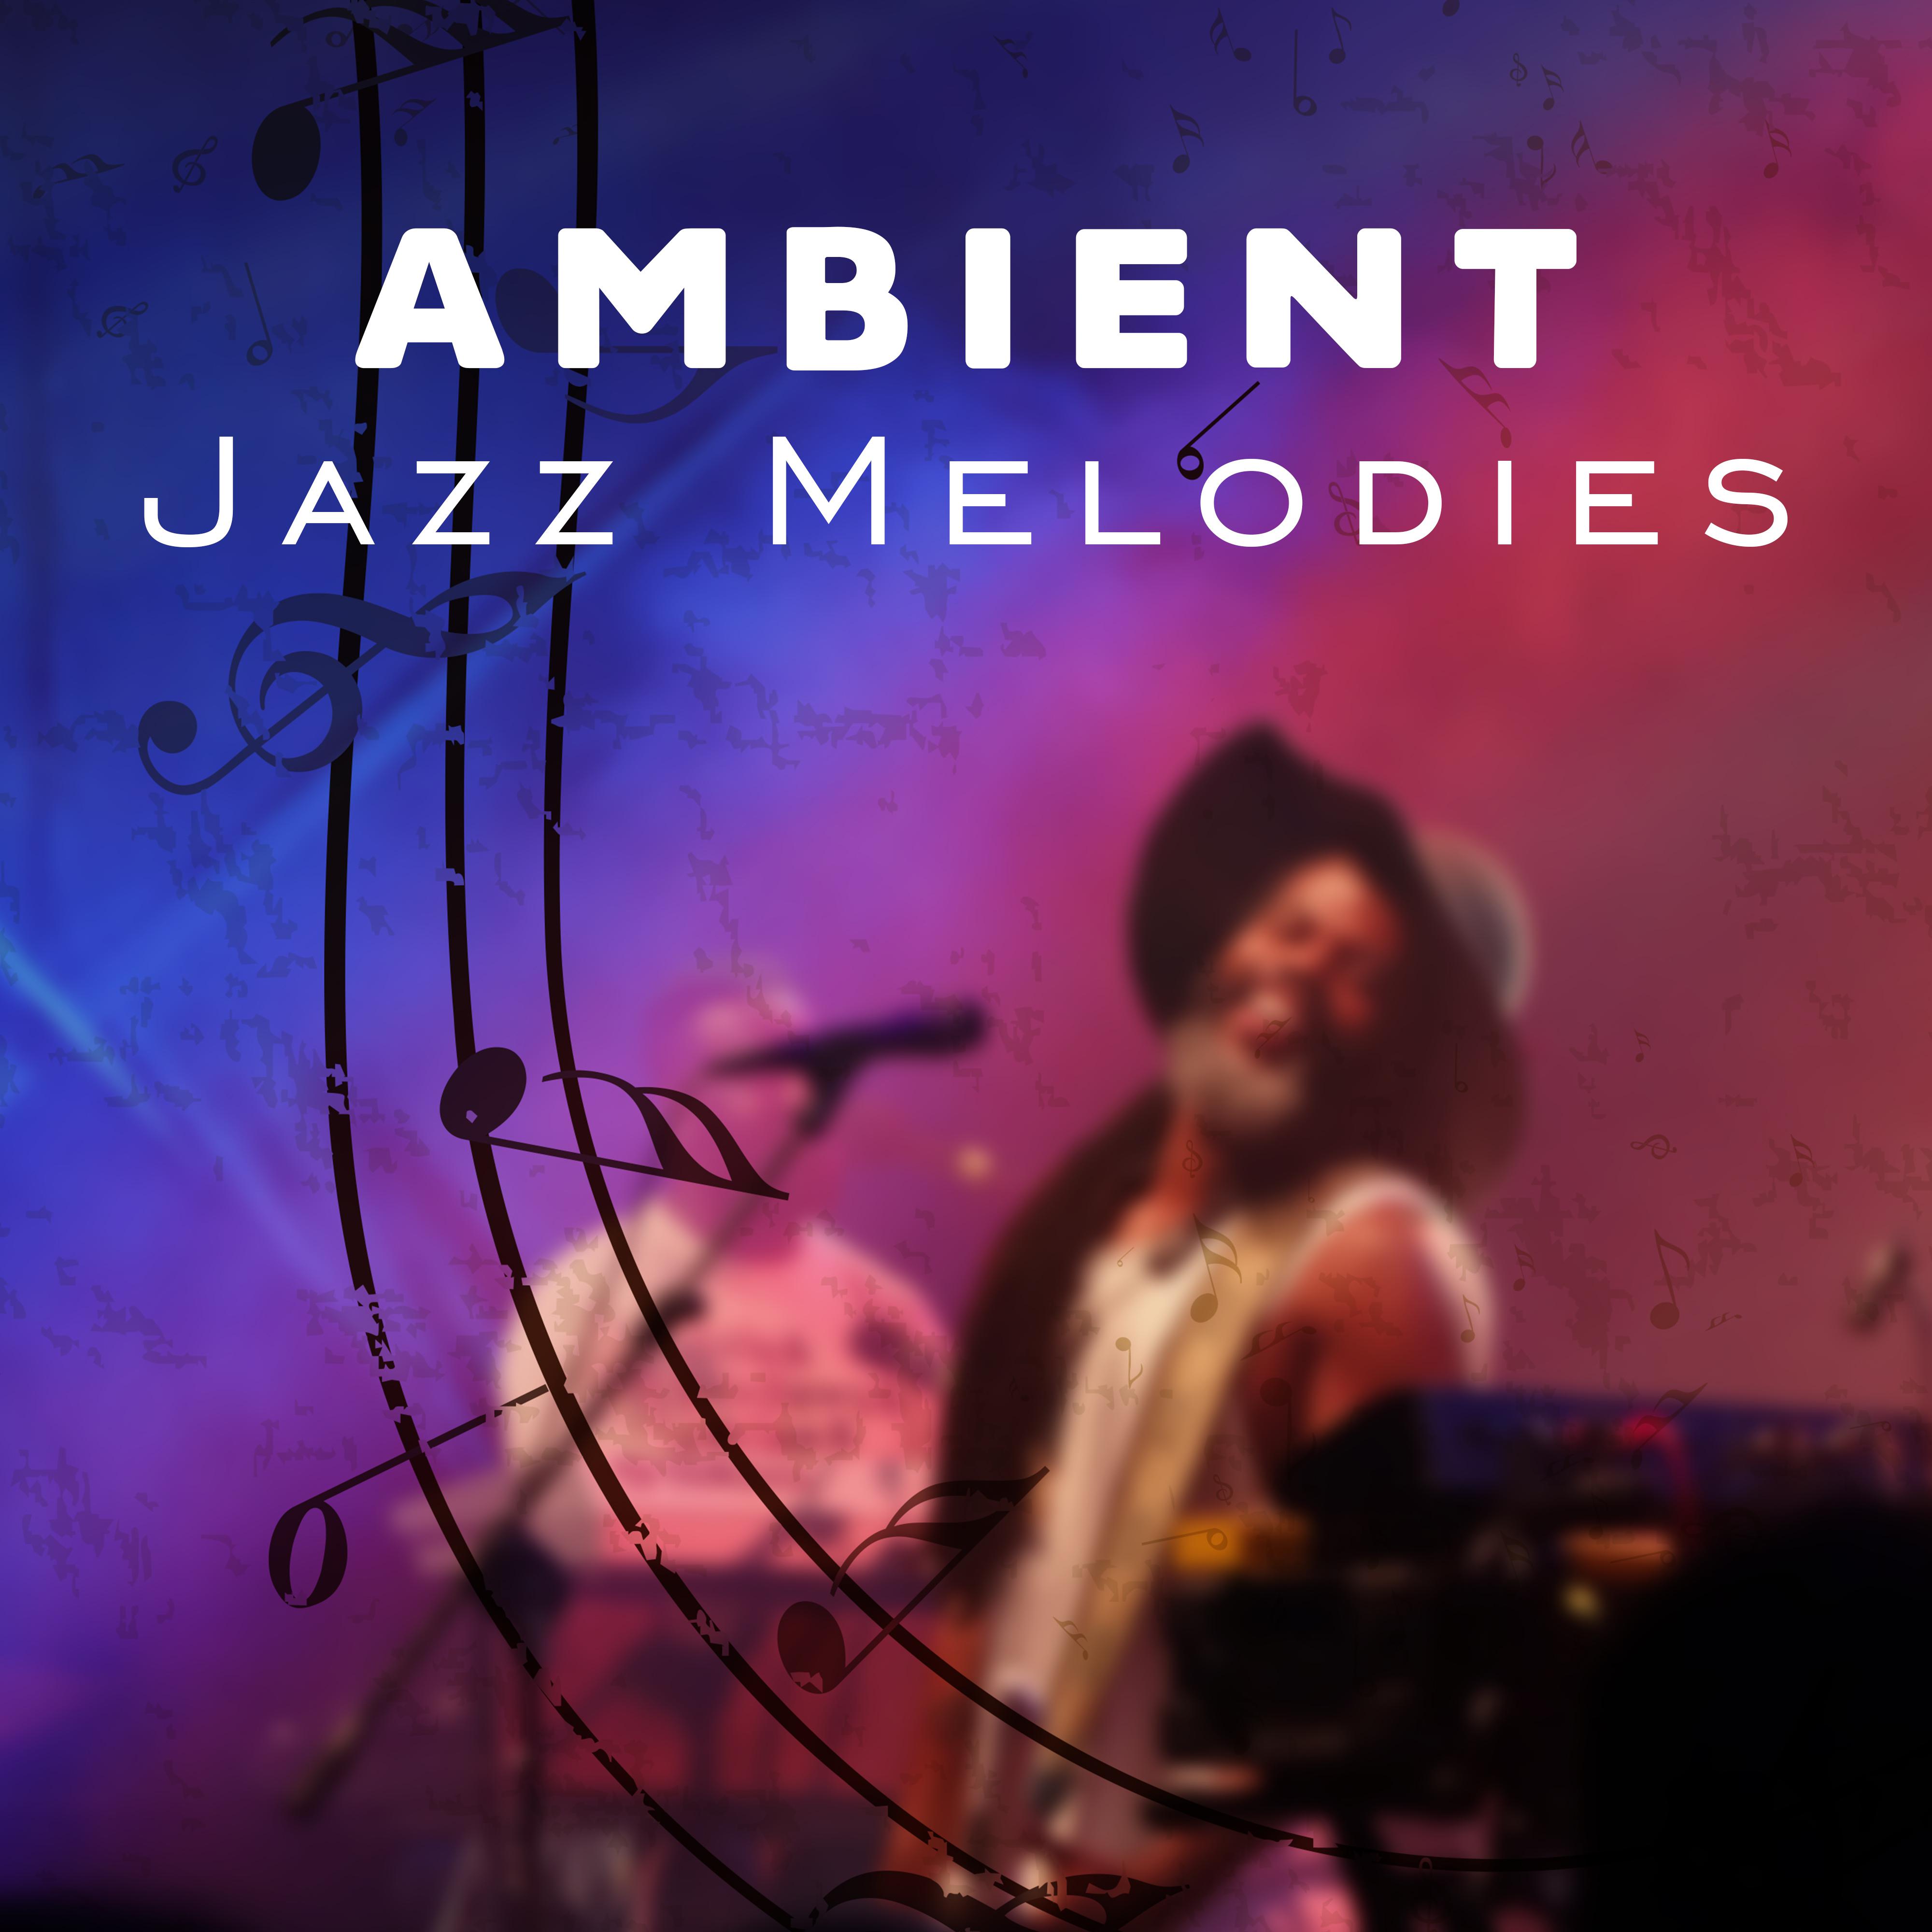 Ambient Jazz Melodies – Smooth Piano Note, Instrumental Jazz Music, Sounds for Night Relaxation